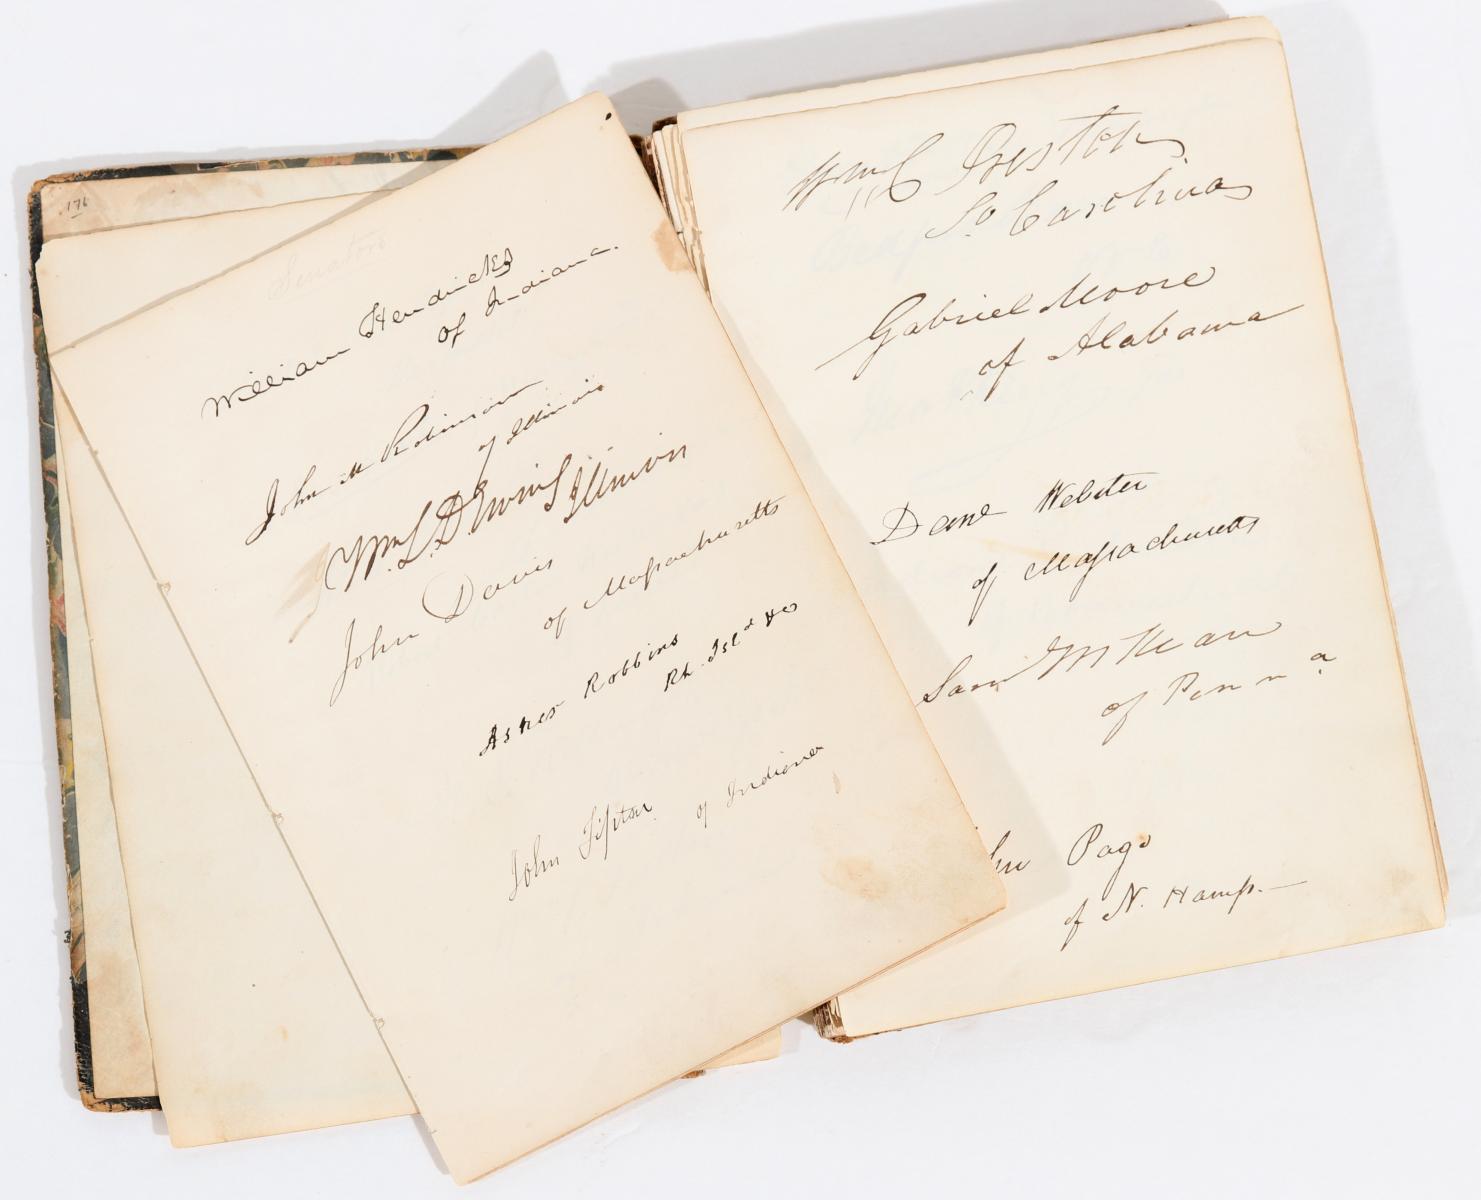 AUTOGRAPH COLLECTION 24TH CONGRESS OF USA 1835-37